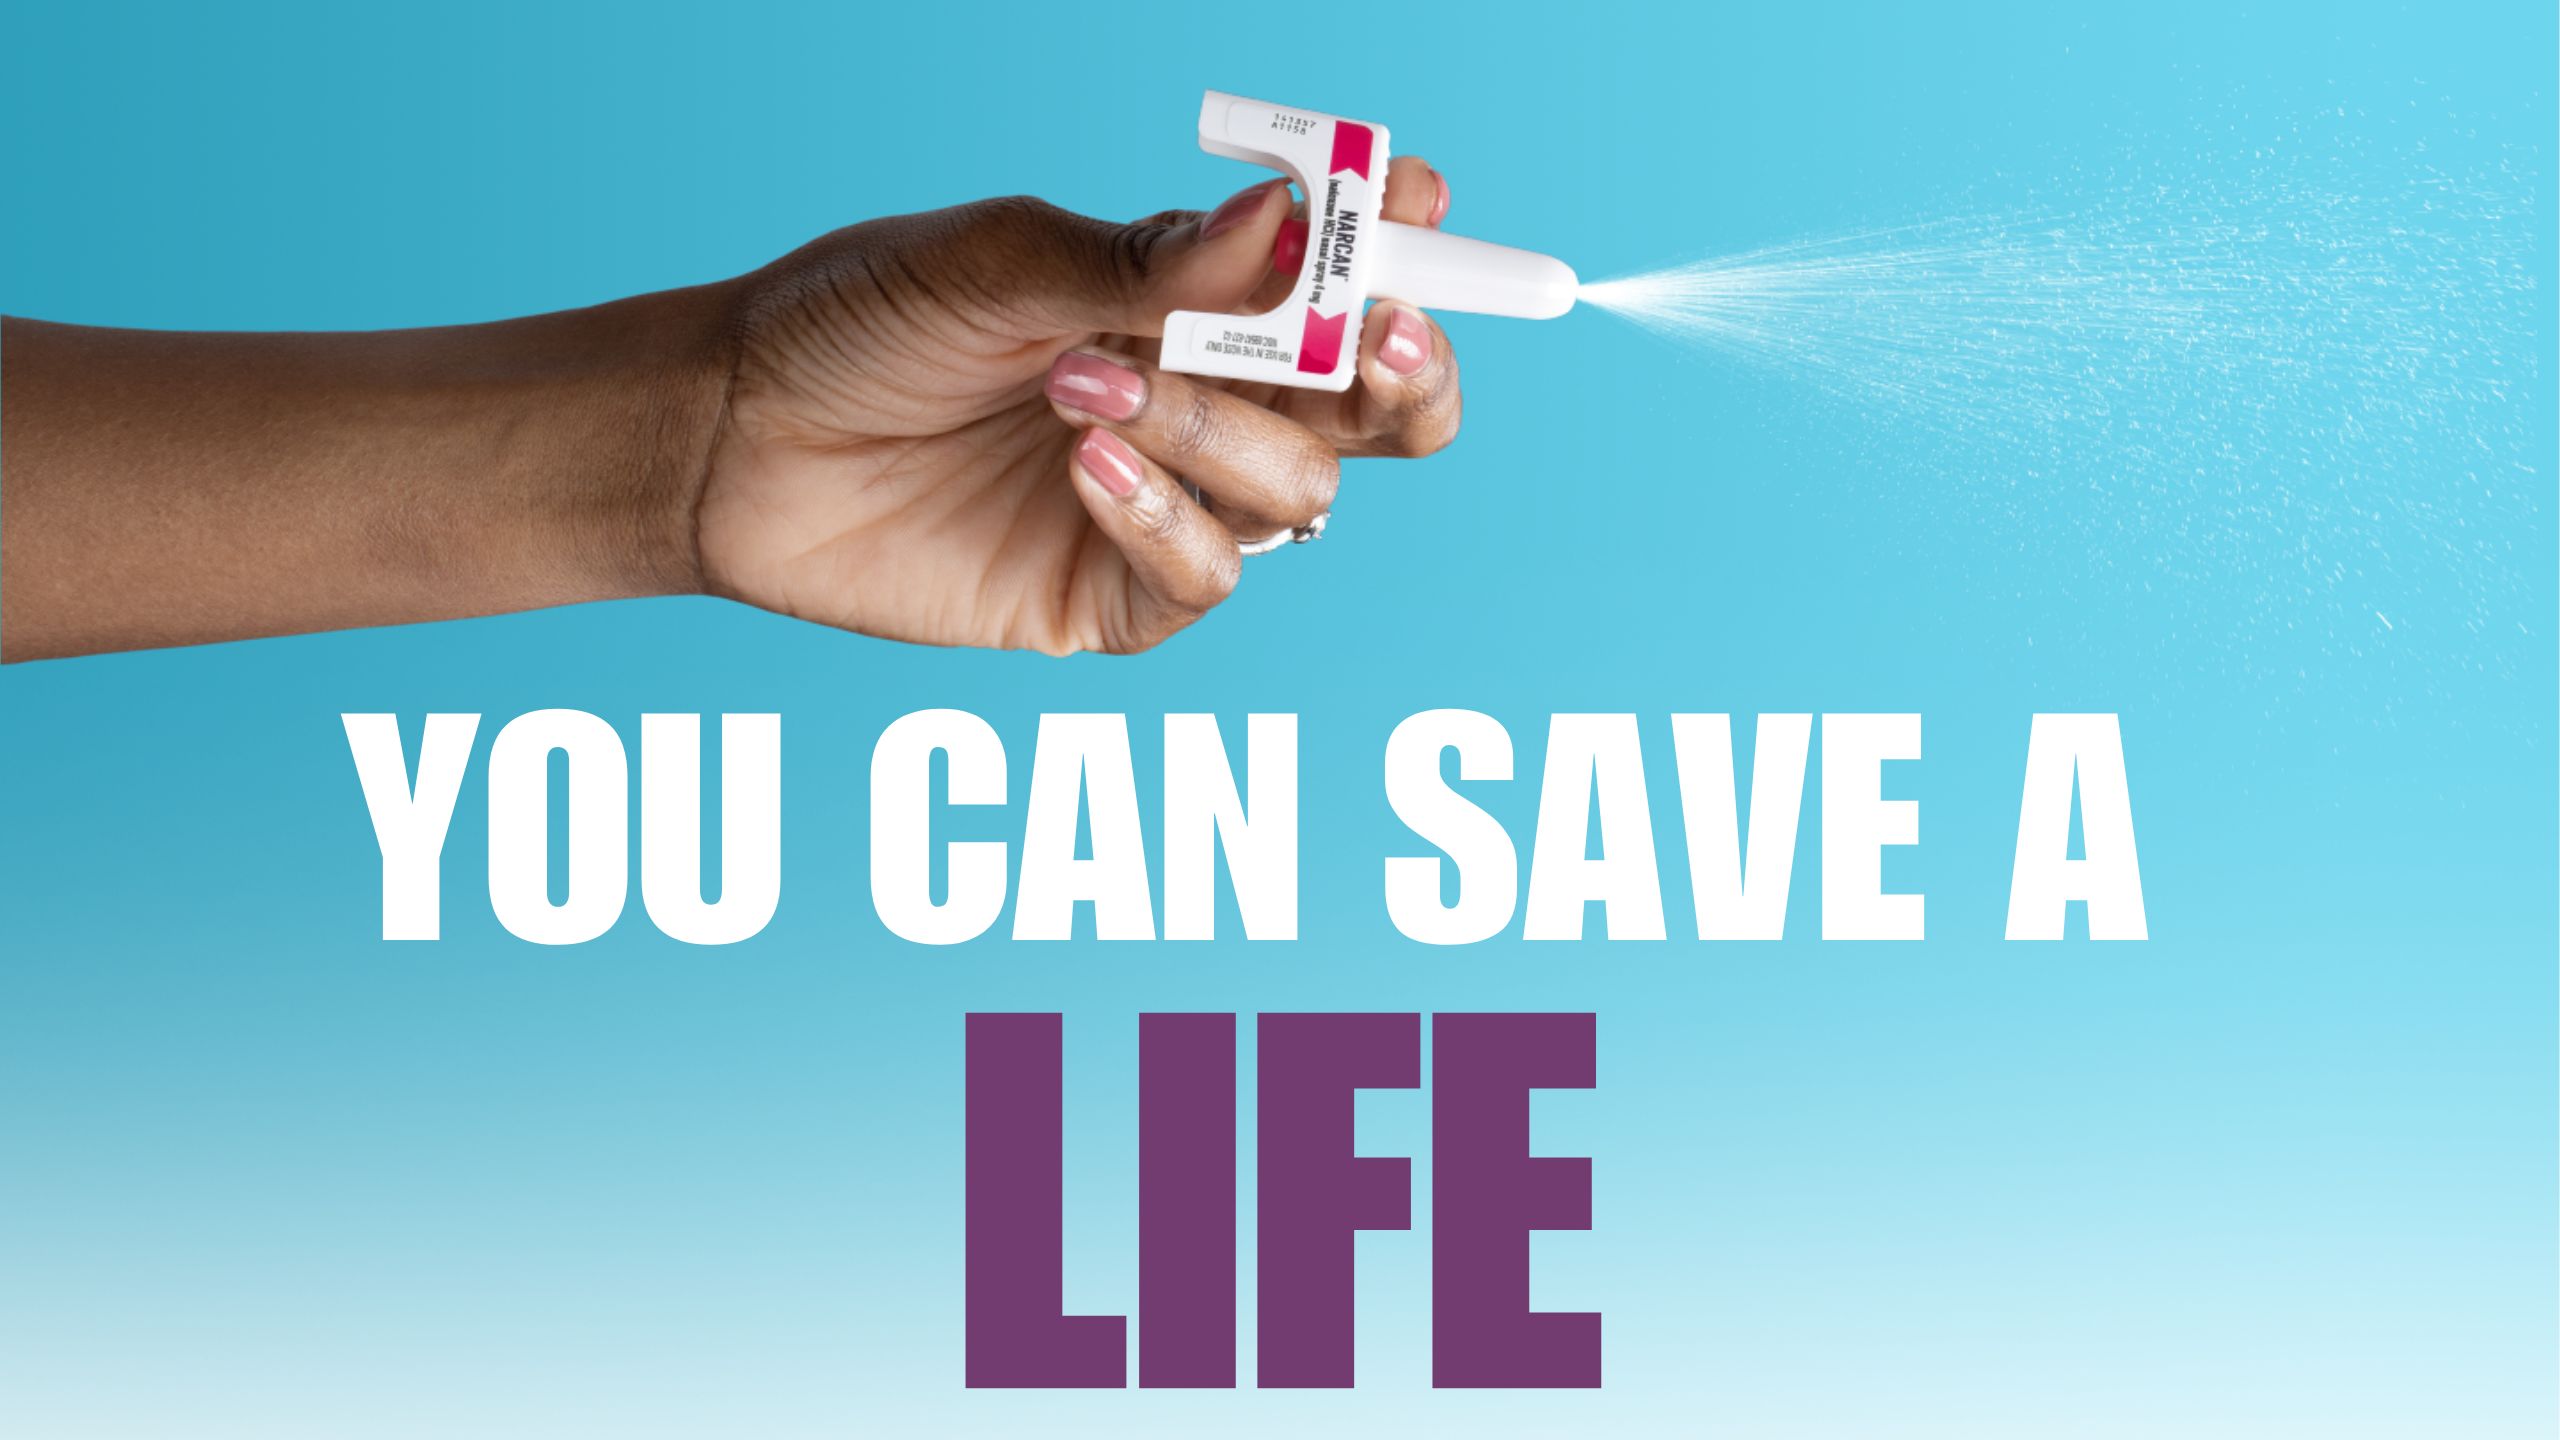 You can save a life with Narcan.